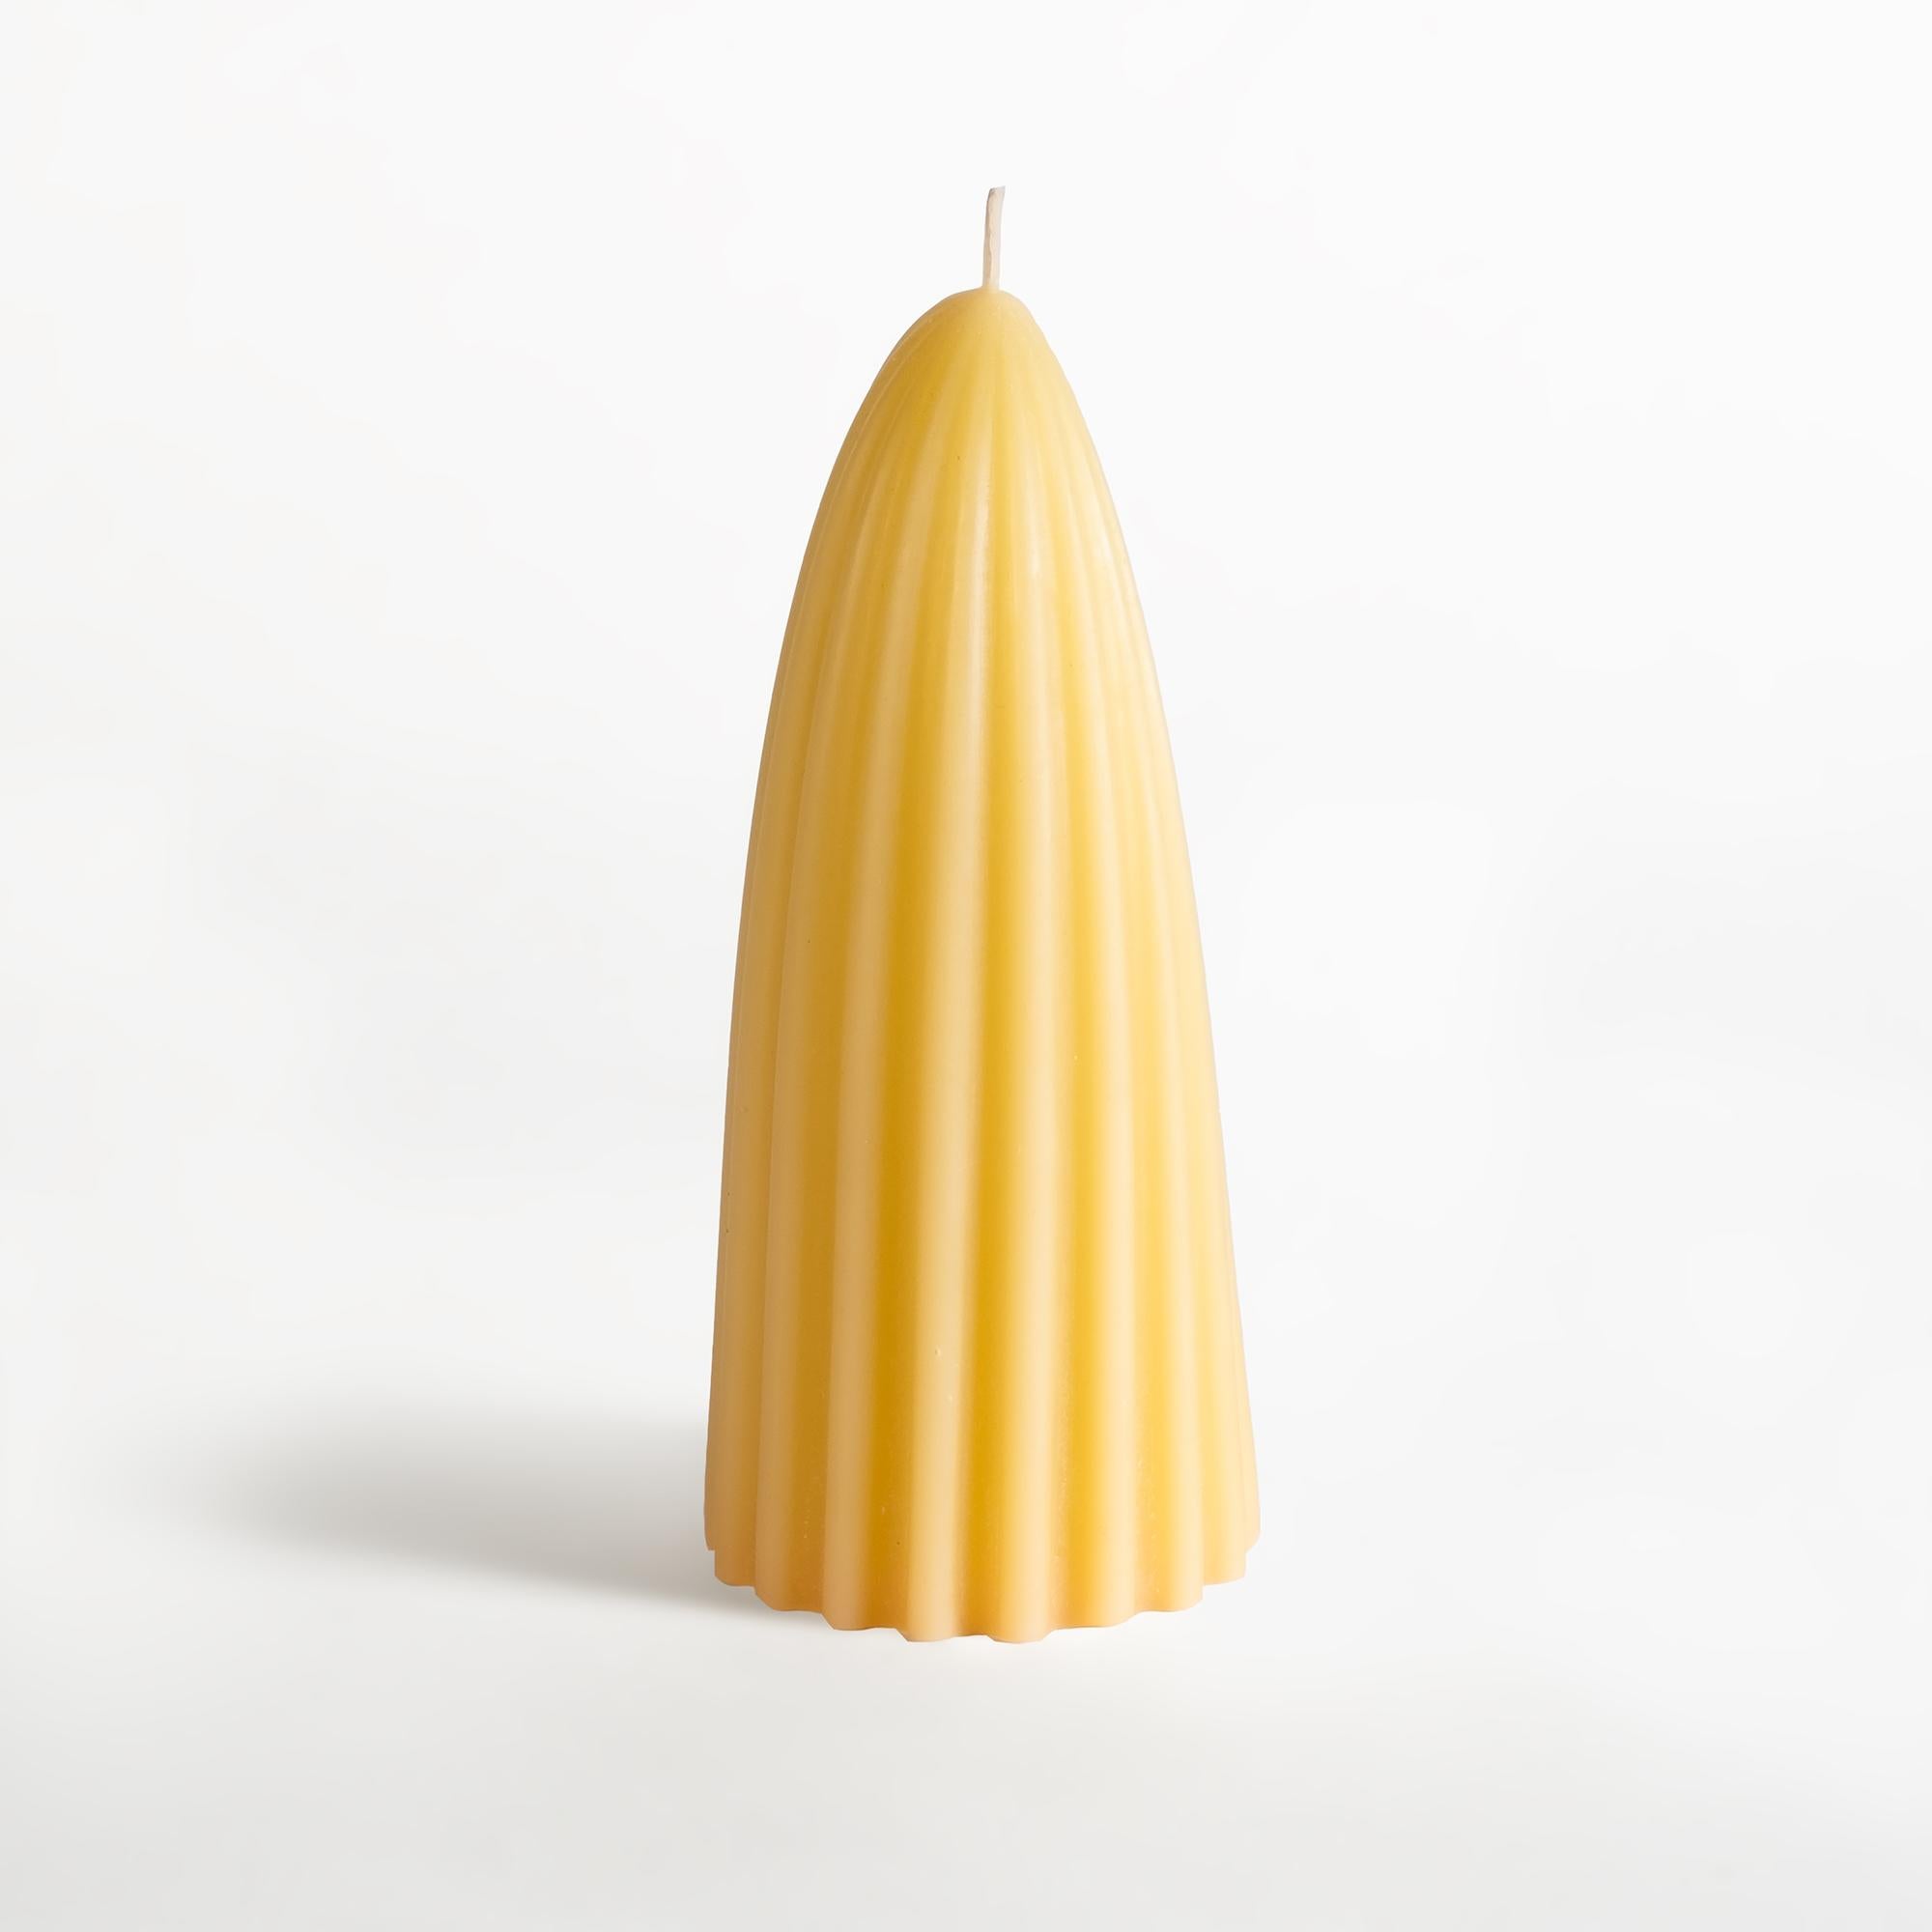 American Tusk Candle, Medium, Natural Beeswax For Sale